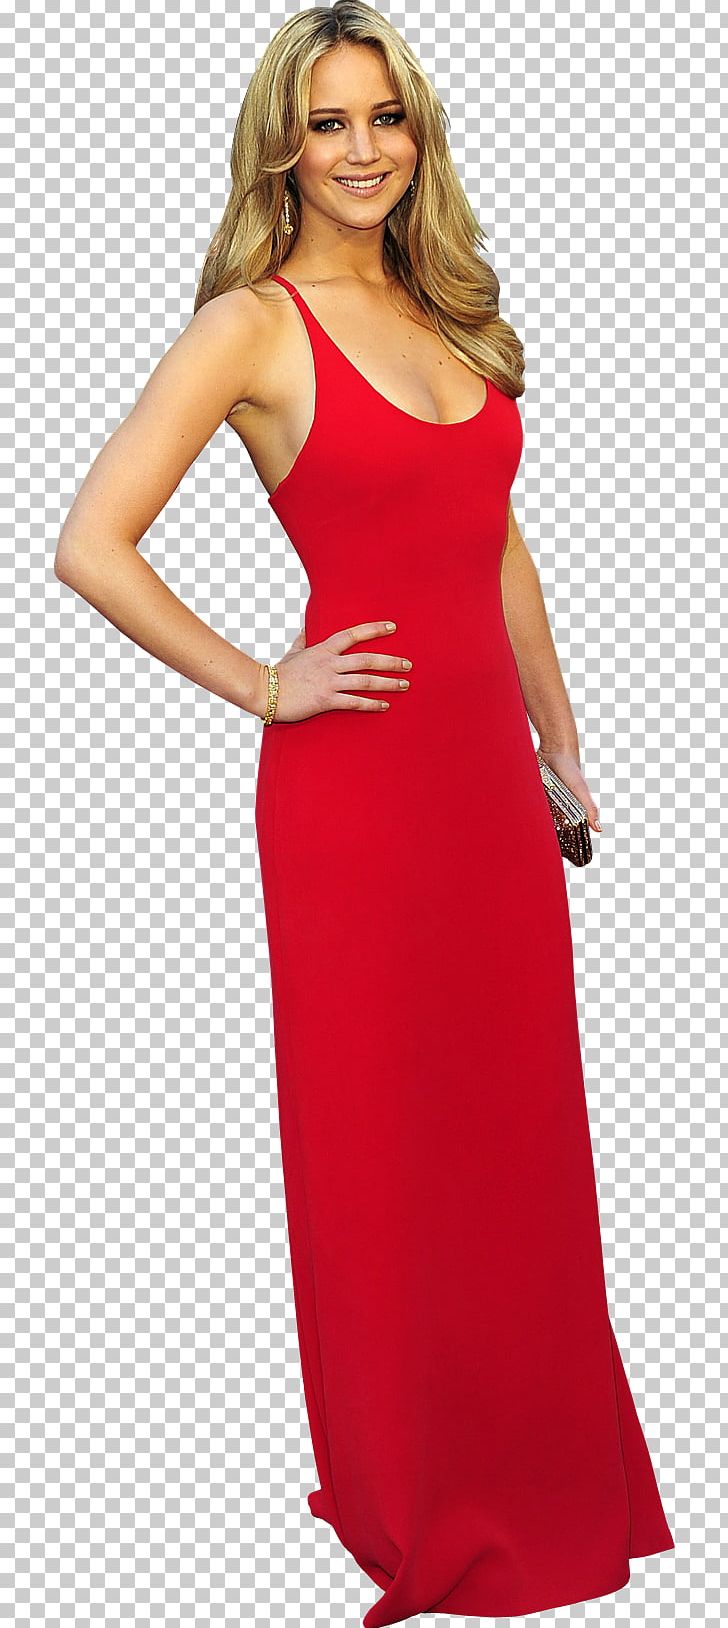 Jennifer Lawrence The Hunger Games Actor Model PNG, Clipart, Actor, Asher Roth, Clothing, Cocktail Dress, Costume Free PNG Download